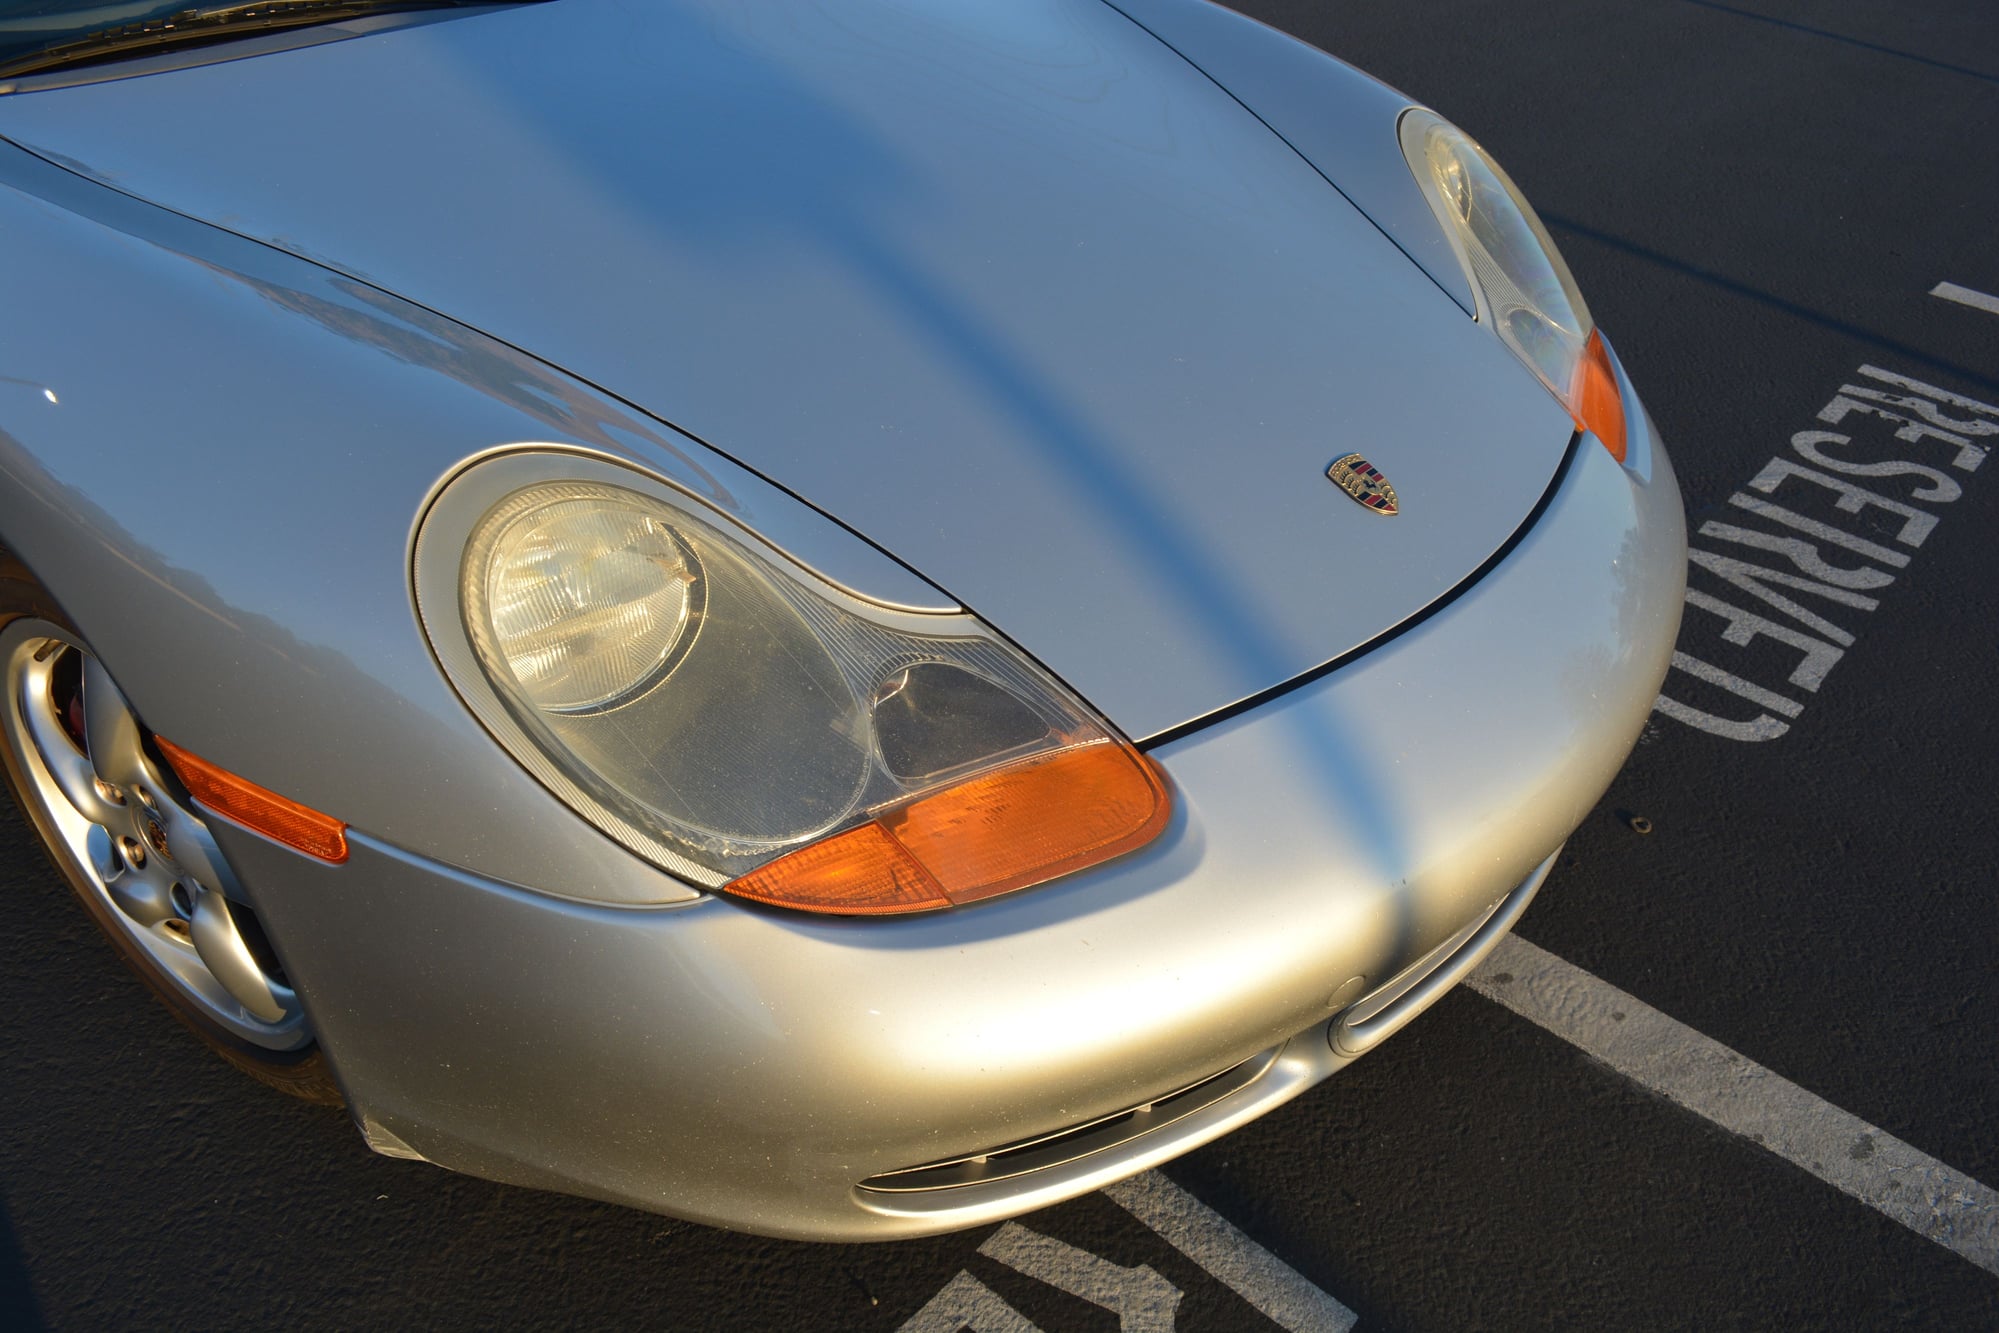 2002 Porsche Boxster - 2002 Boxster S - Used - VIN WP0CB298X2U663633 - 125,000 Miles - 6 cyl - 2WD - Manual - Convertible - Silver - Fremont, CA 94539, United States